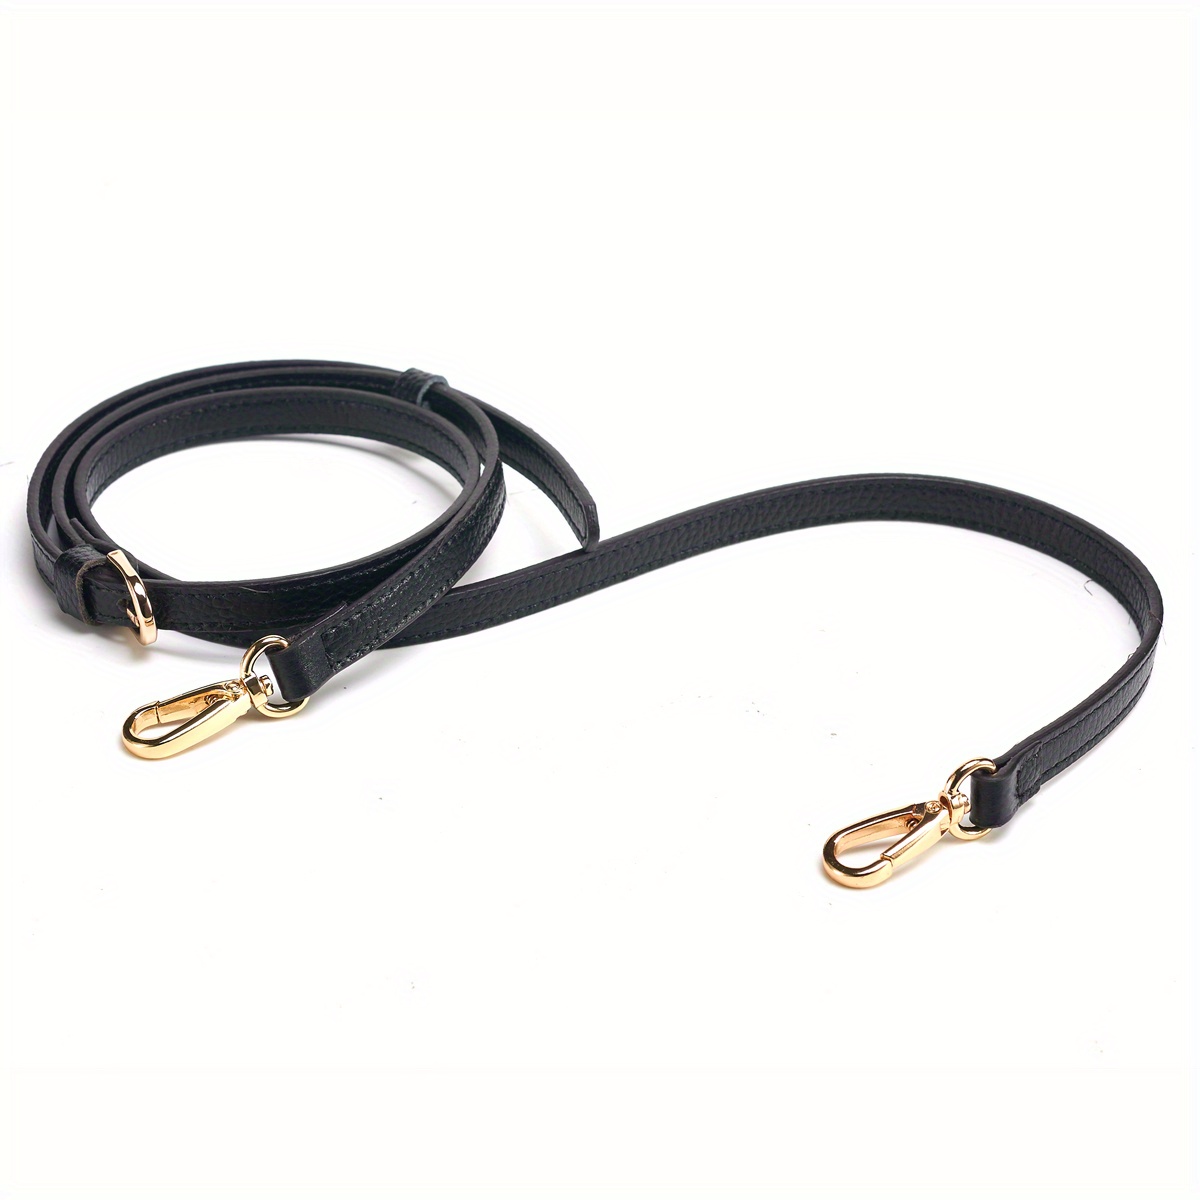  47 Adjustable Purse Strap Replacement with Buckles, Synthetic  Leather Chain Strap Bag Chain for Purse, Bag Strap Crossbody for Shoulder  Cross Body Sling Purse Handbag (Black Leather Gold Hardware) : Clothing